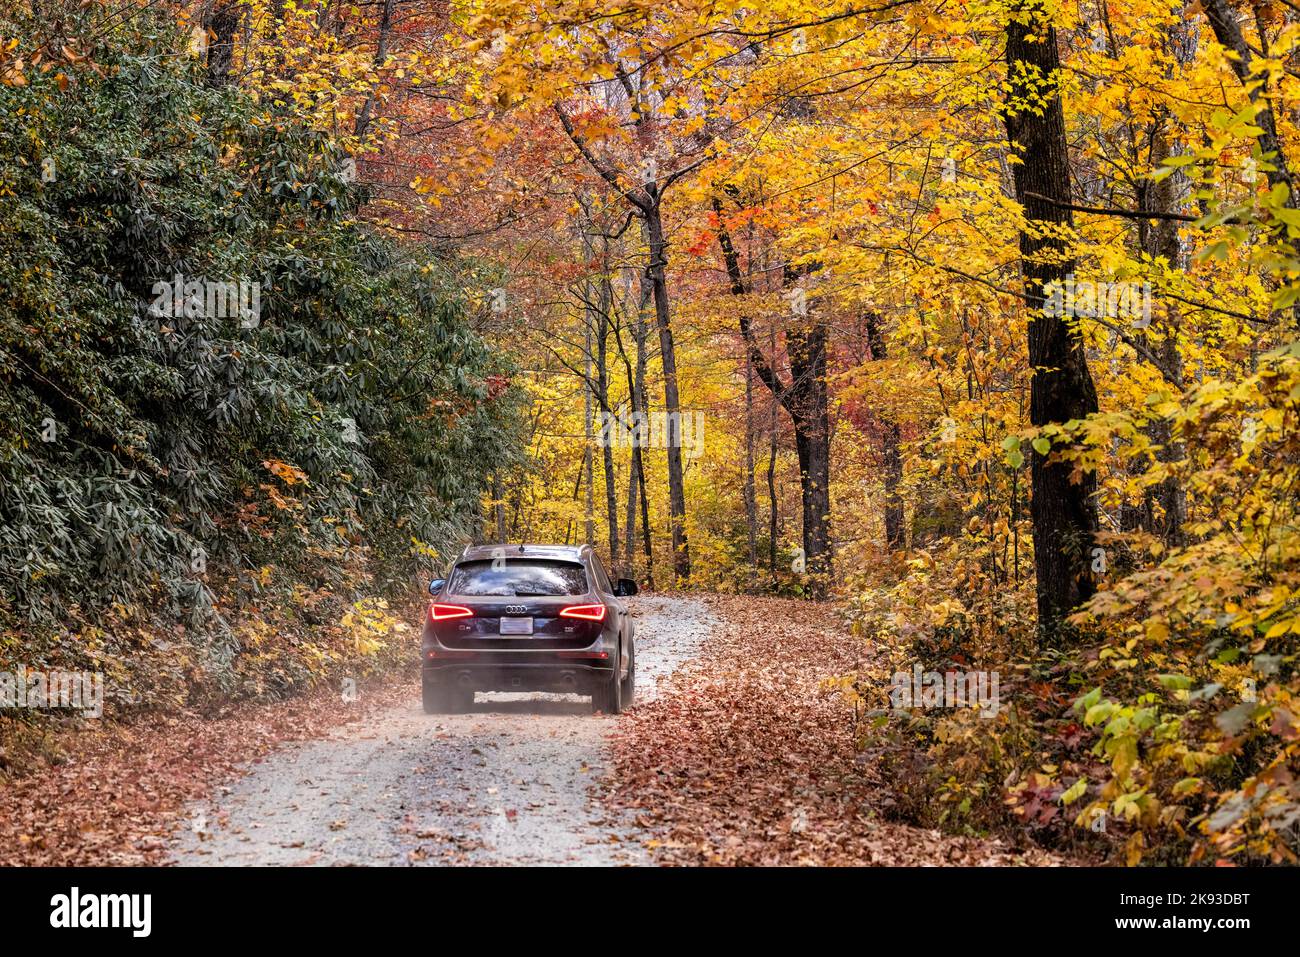 Automobile driving down dirt road through vibrant fall foliage in Pisgah National Forest, Brevard, North Carolina, USA Stock Photo